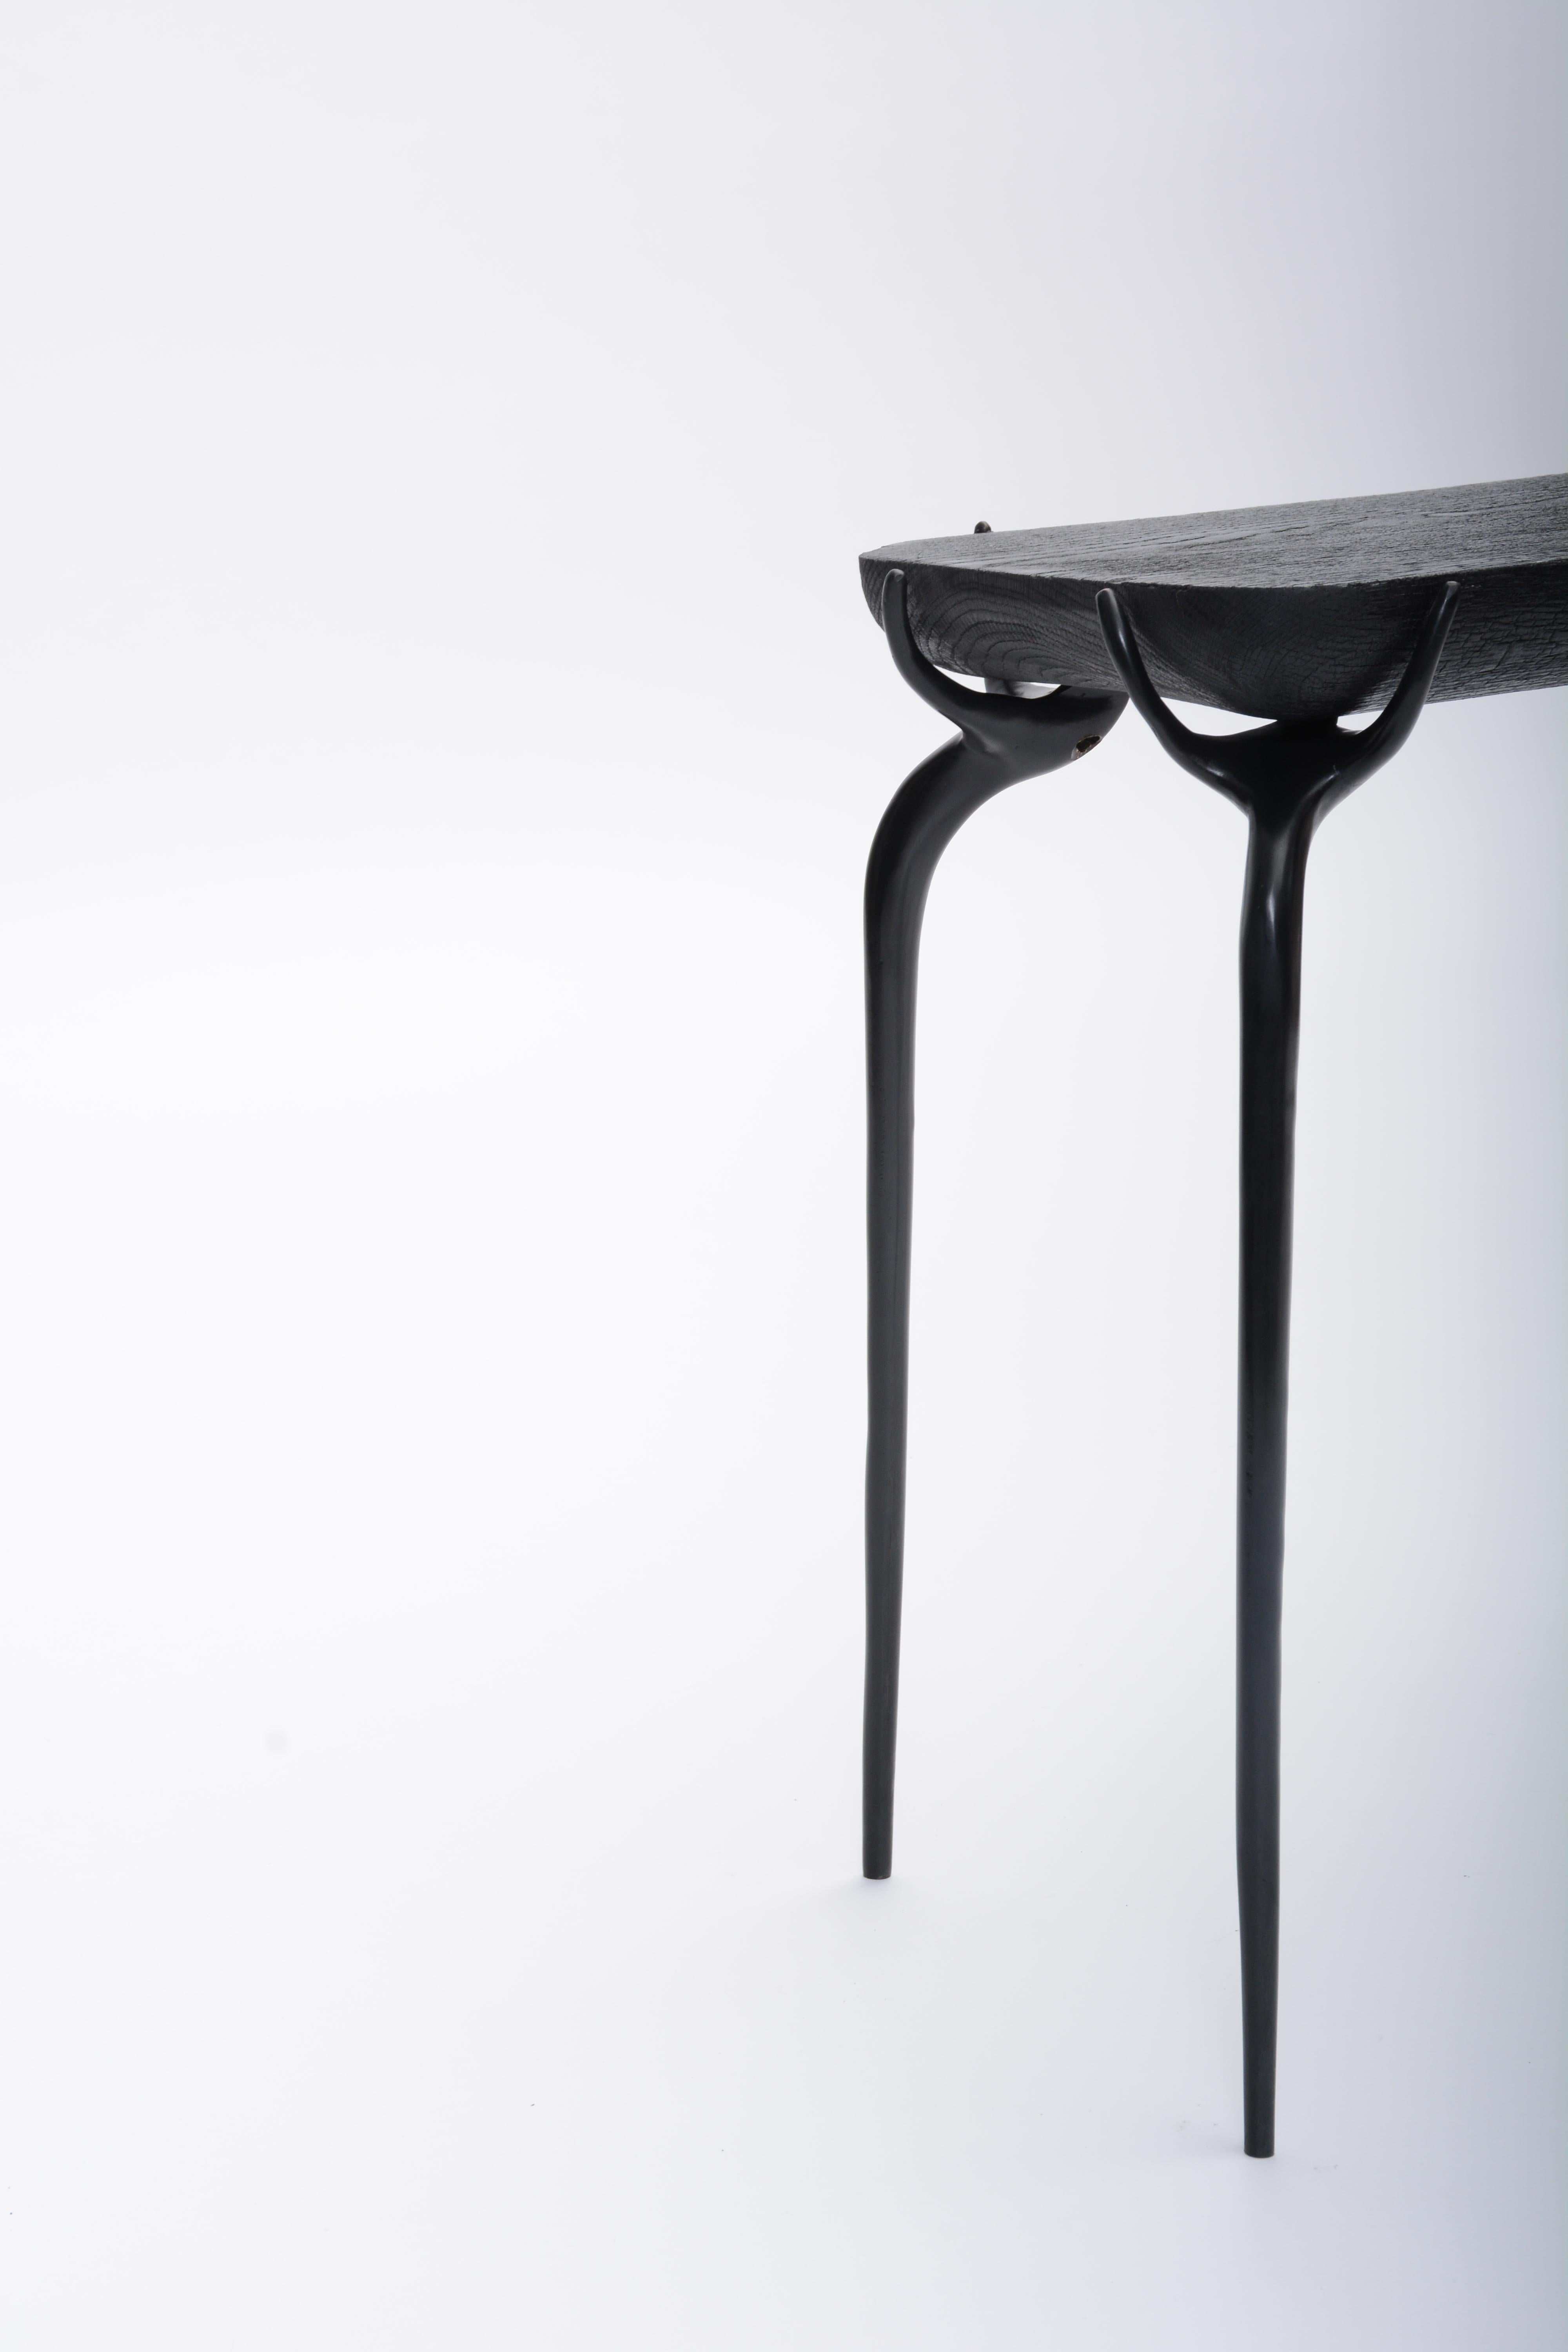 Contemporary Dark Bronze Jewel Side Table with Burnt Black Oak Wooden Top by Elan Atelier For Sale